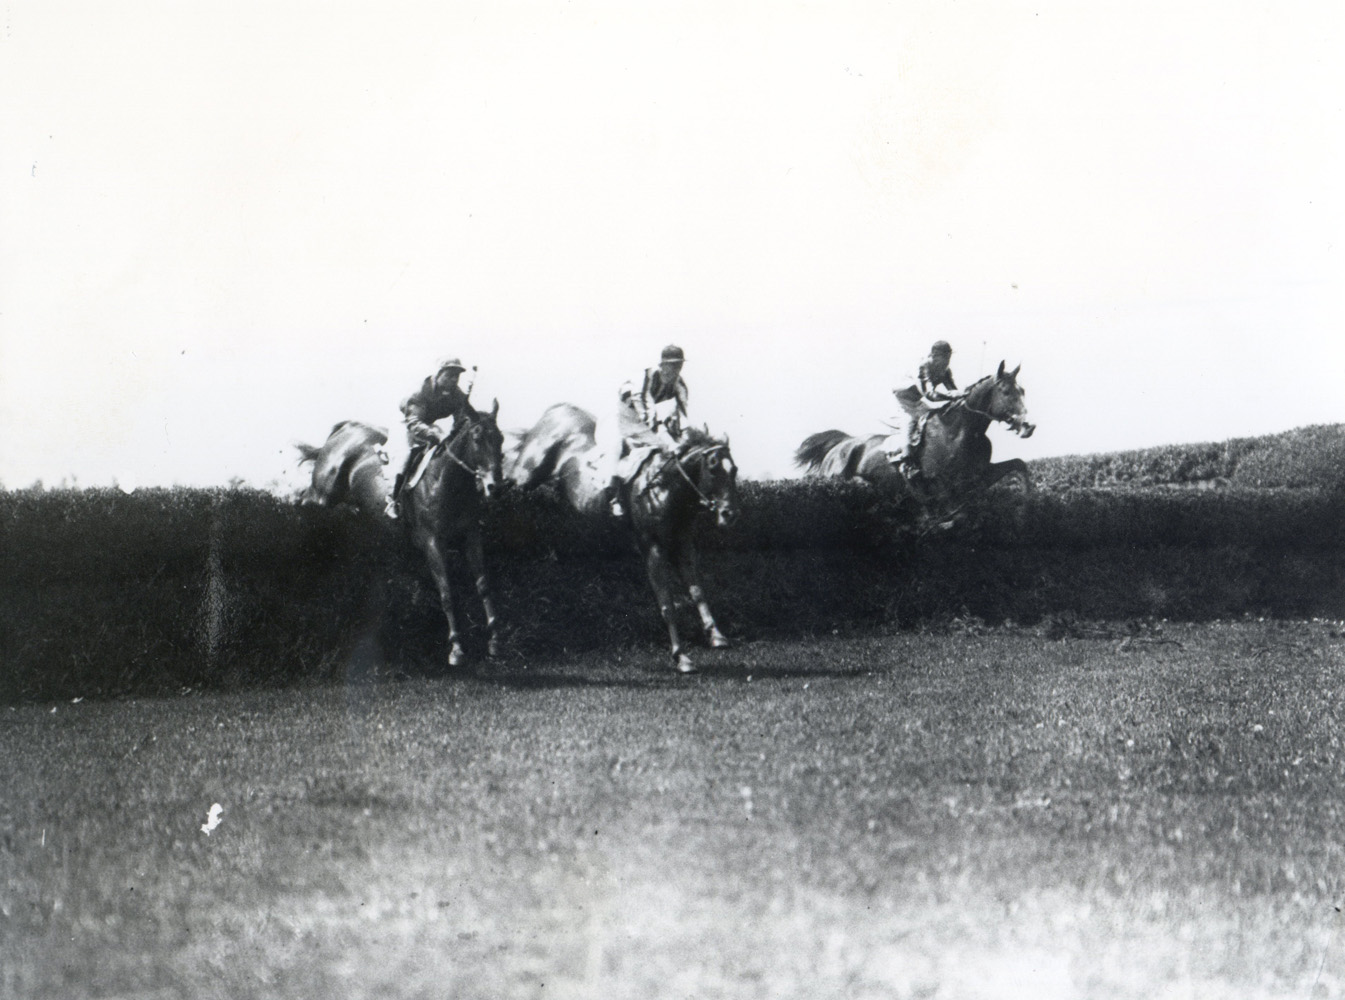 Jolly Roger (far right) taking a jump in the 1928 Charles Appleton Memorial Cup Steeplechase at Belmont Park (Keeneland Library Cook Collection/Museum Collection)